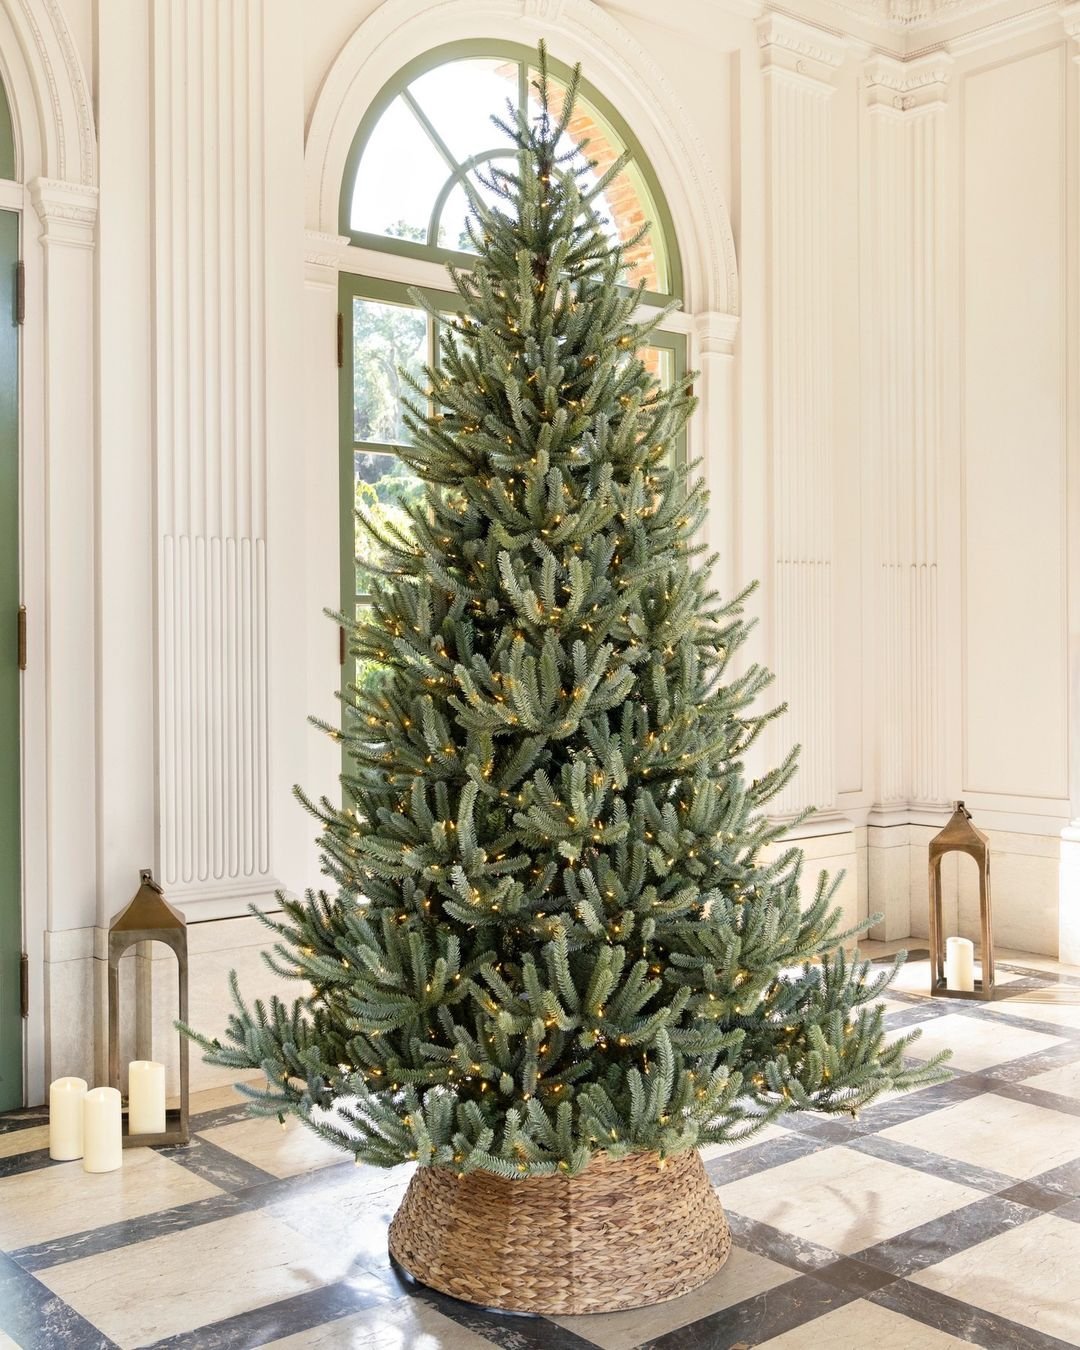 A beautifully decorated Balsam Fir Christmas tree in a large room with windows, creating a festive ambiance.